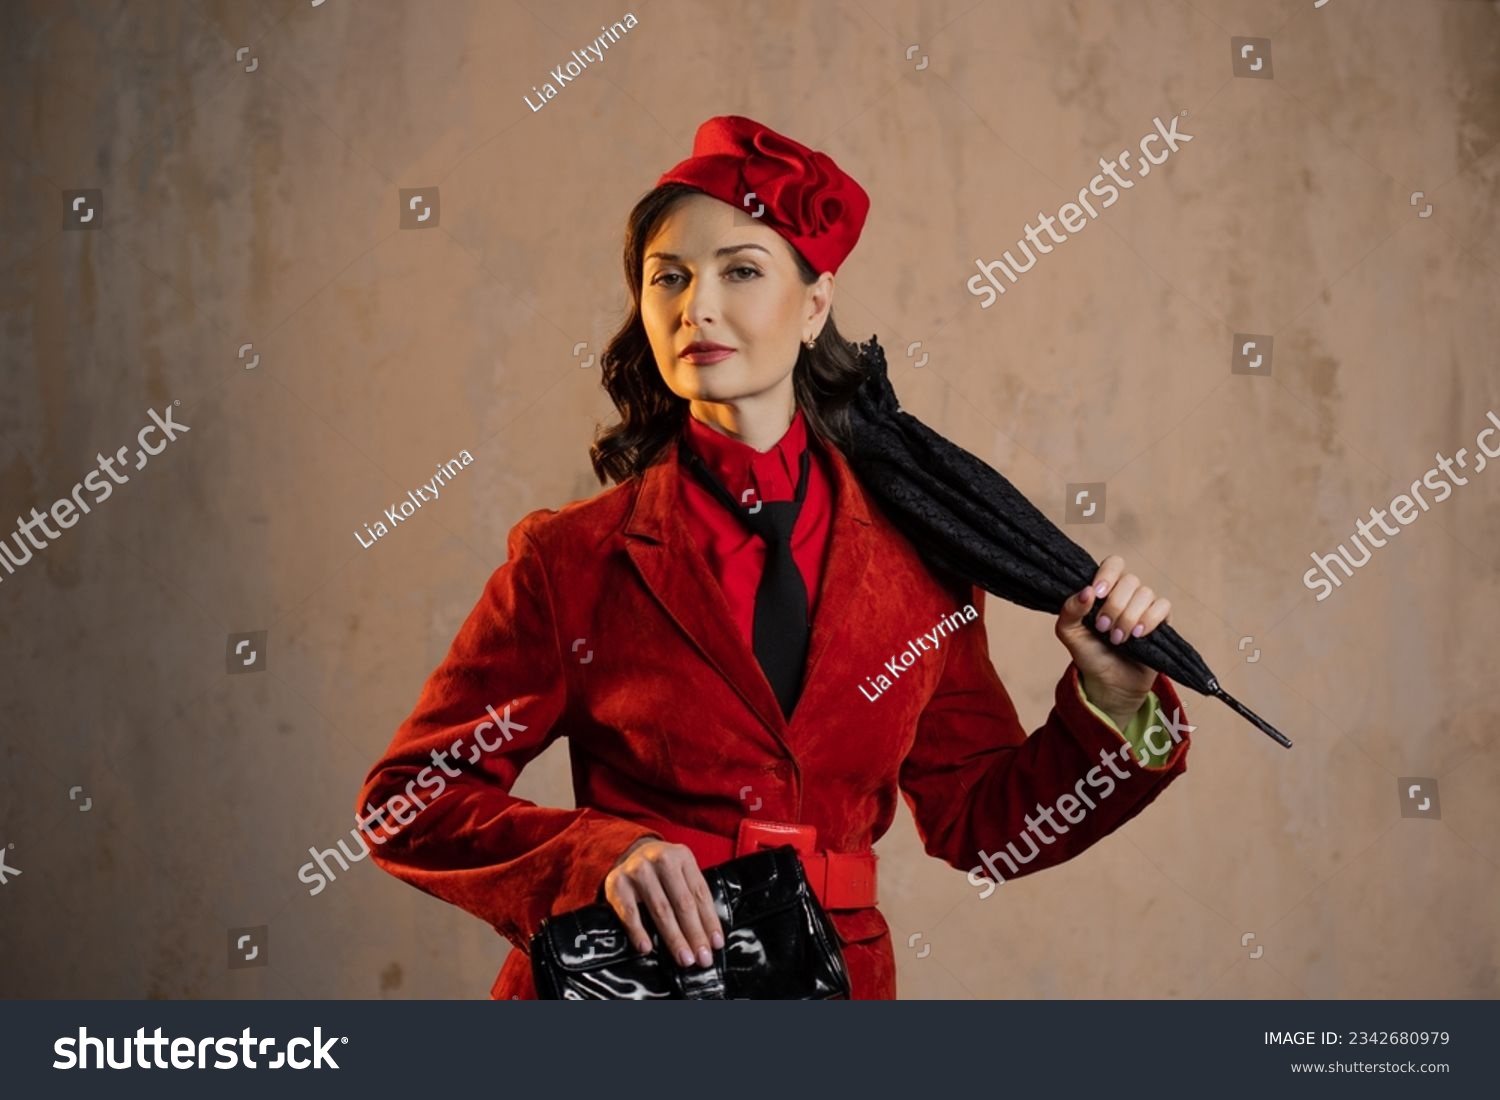 A stylish lady in a red old-fashioned suit with a hat and a lace umbrella #2342680979